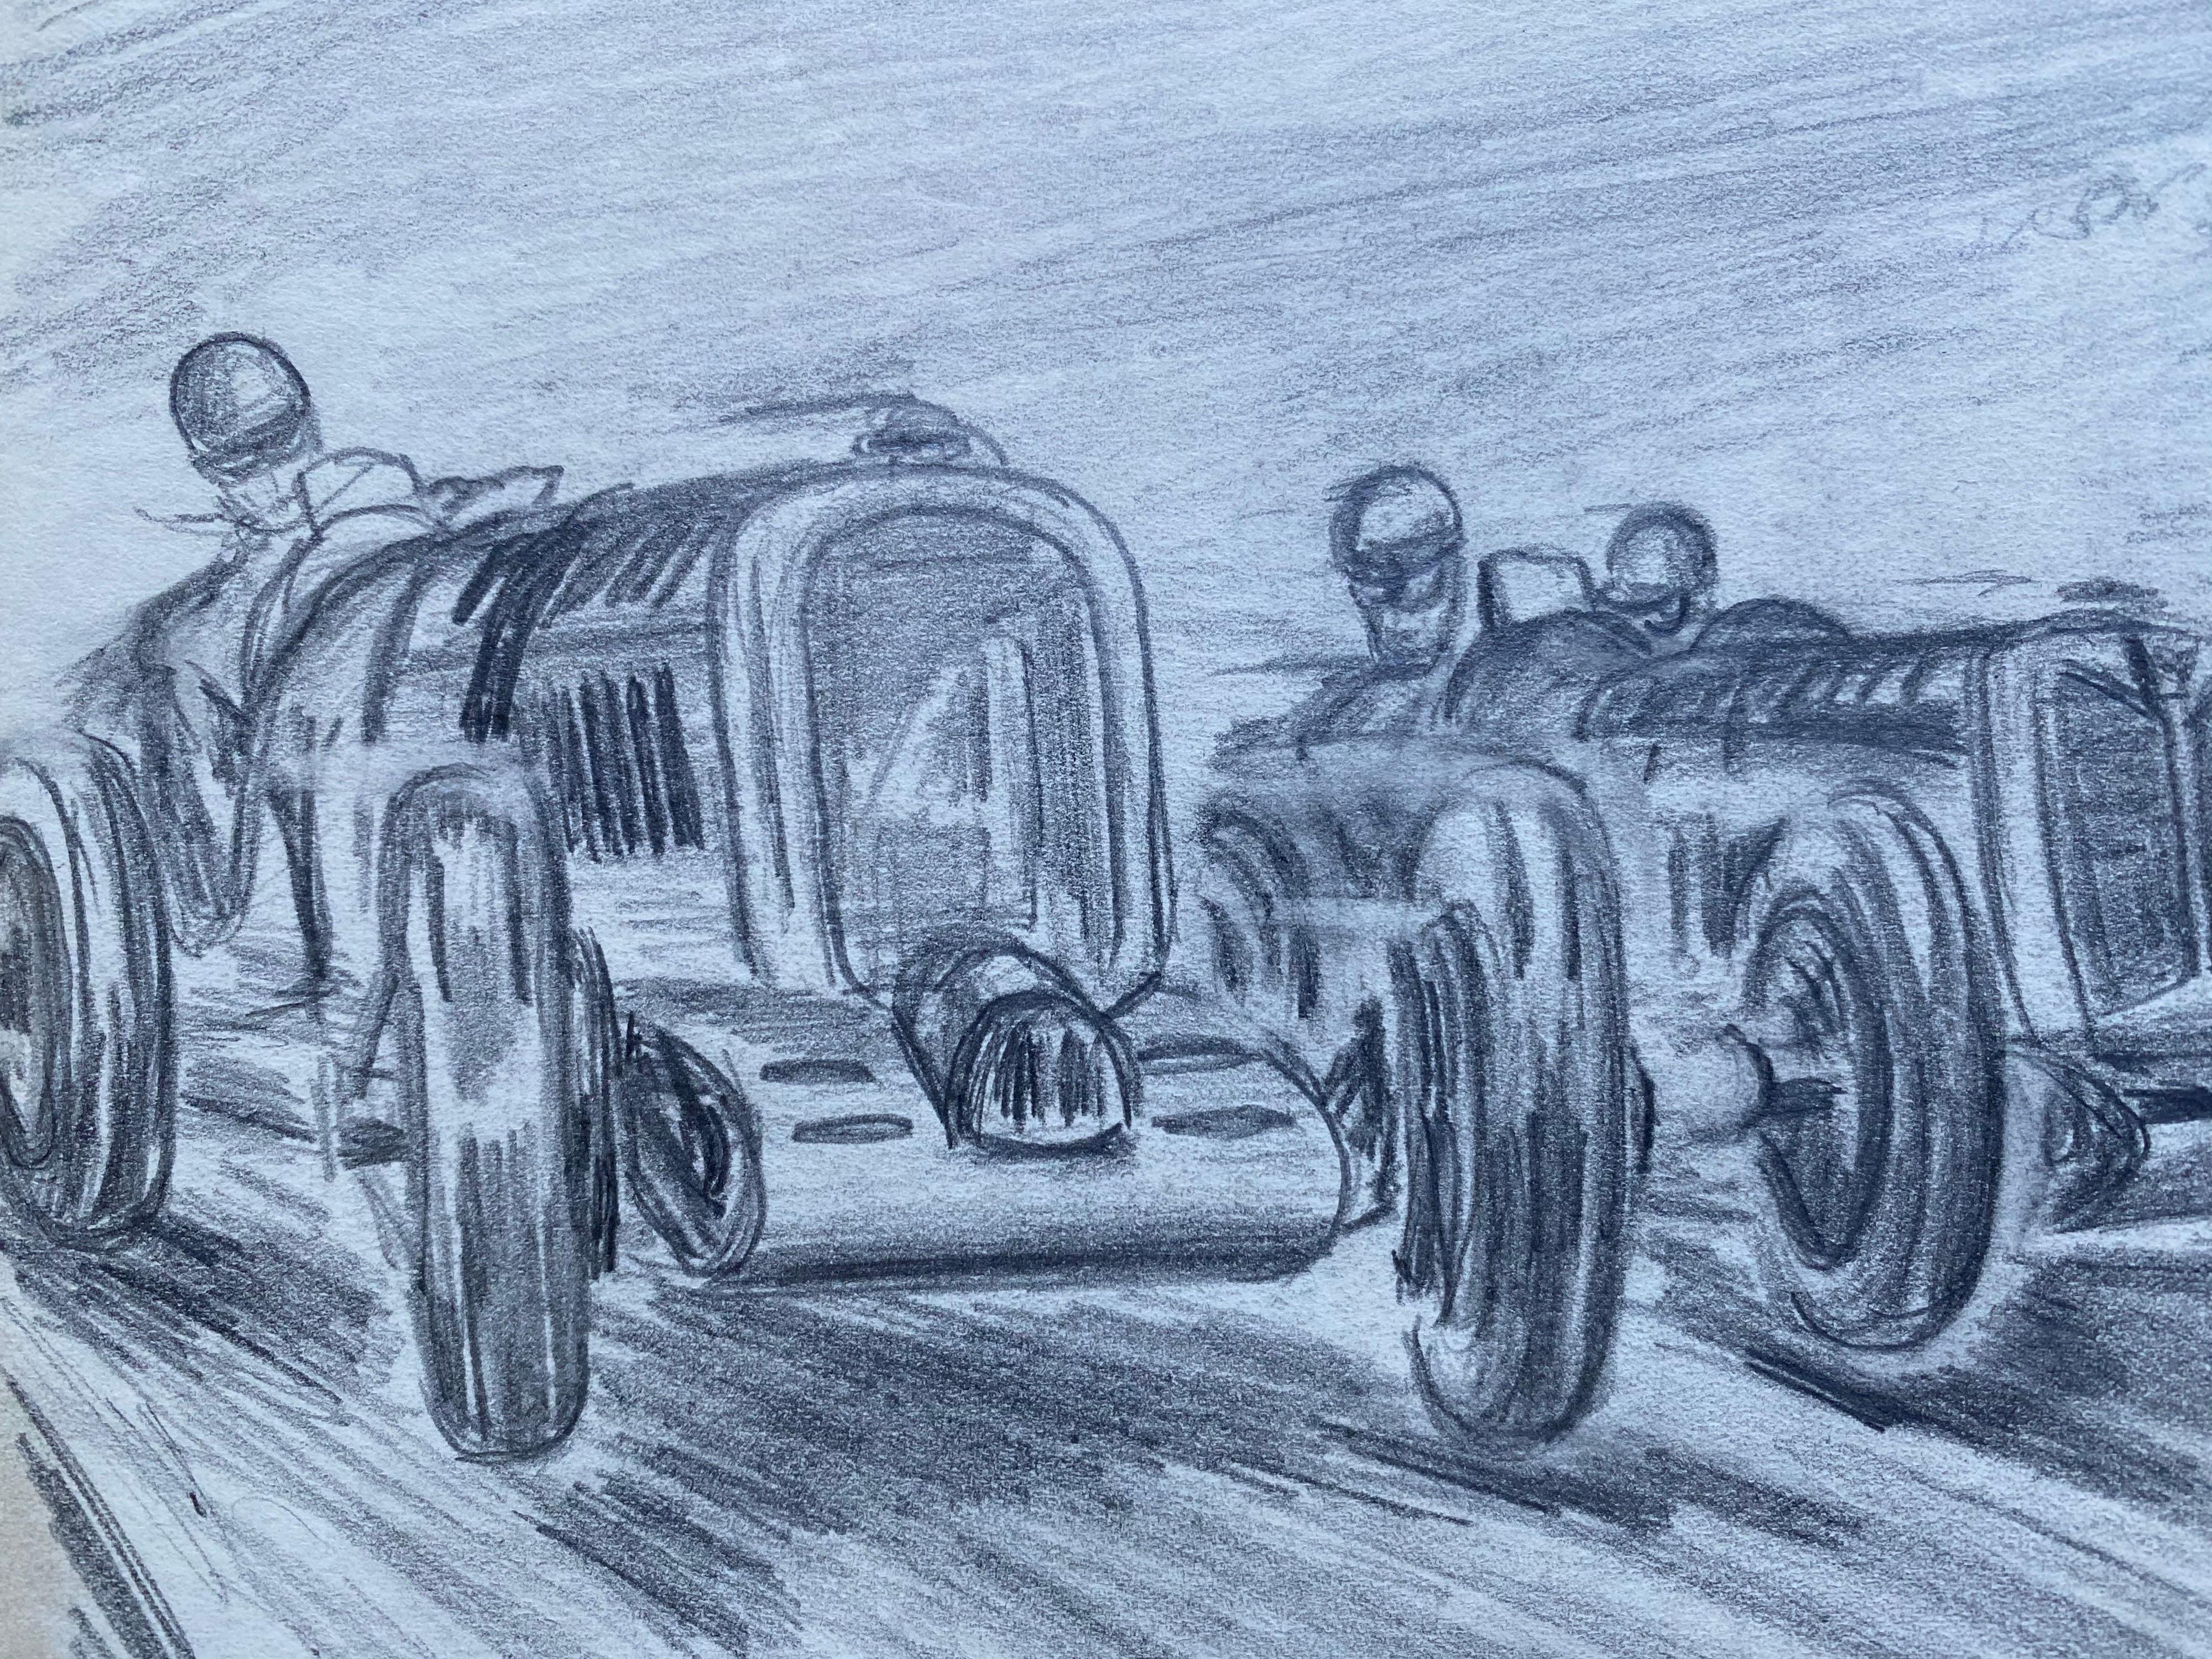 Wonderful original pencil drawing depicting a vintage motor car racing scene from the 1930's. 

The drawing is by - 